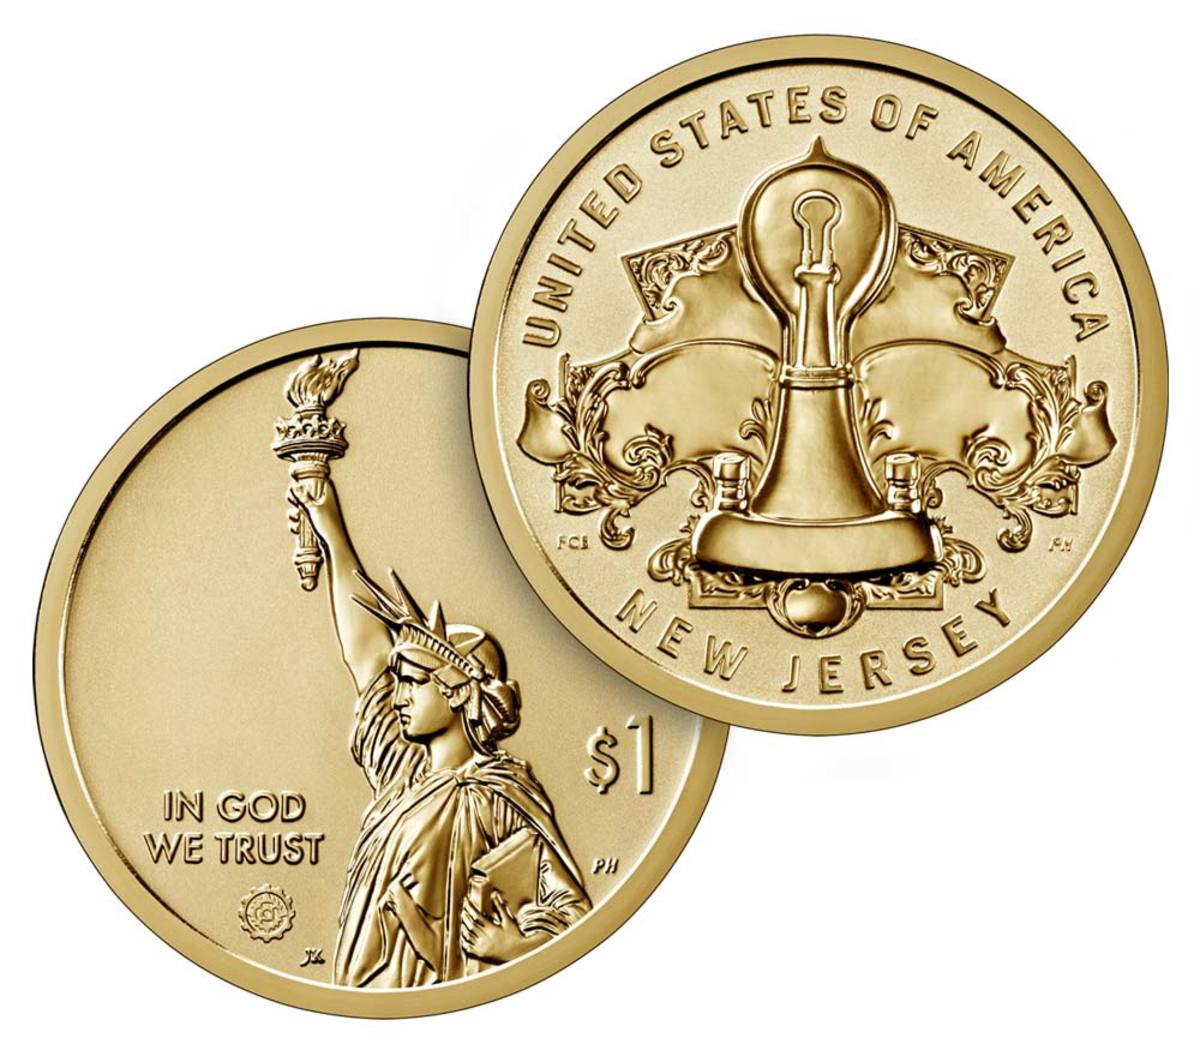 The new American Innovation Reverse Proof dollar coin featuring New Jersey goes on sale Jan. 7 at noon EST. (Images courtesy United States Mint.)